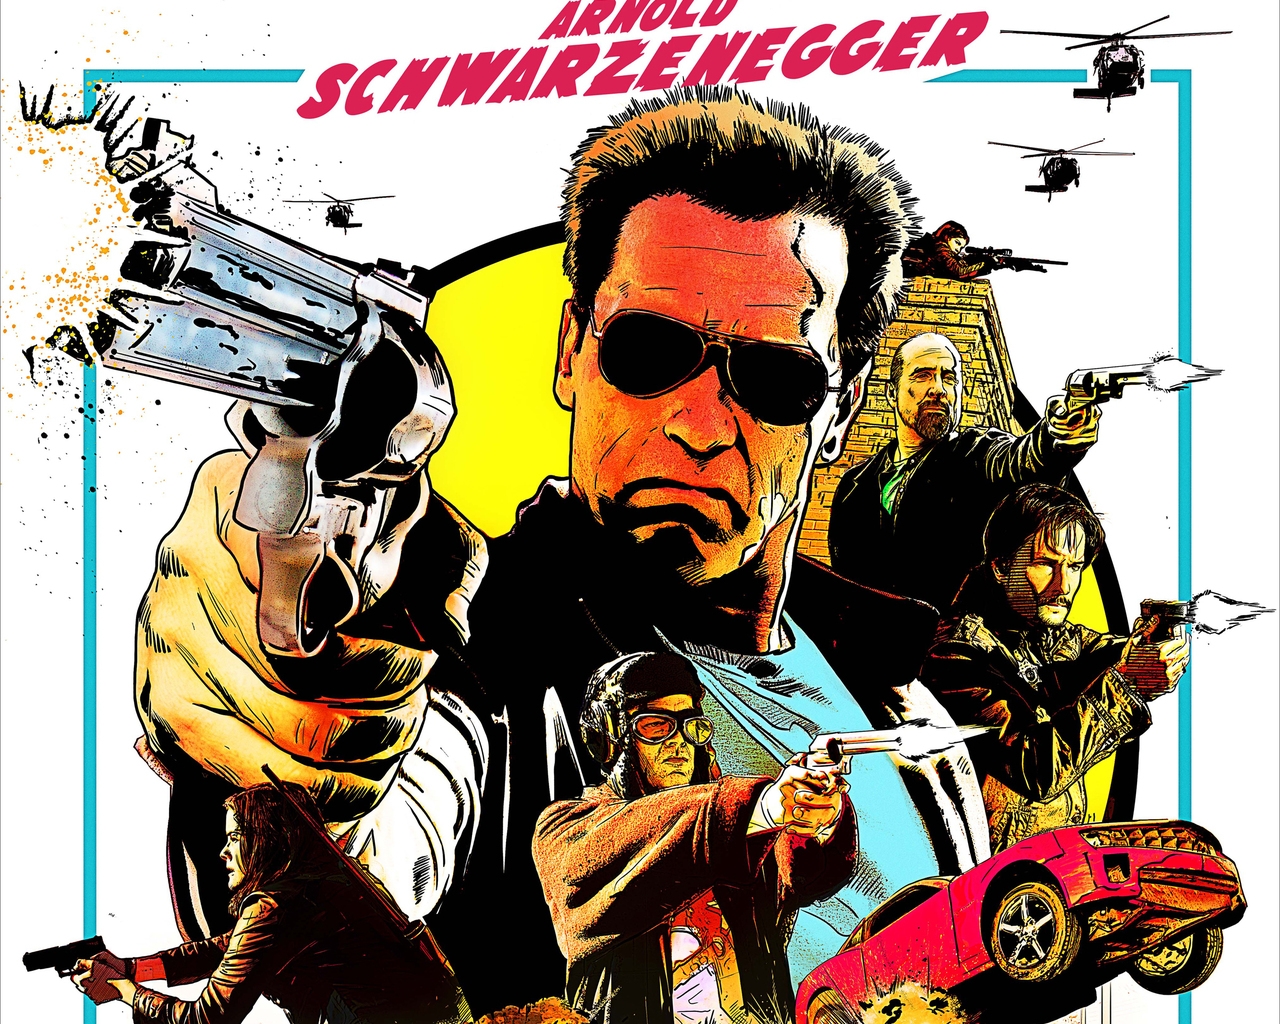 The Last Stand Arnold Schwarzenegger for 1280 x 1024 resolution